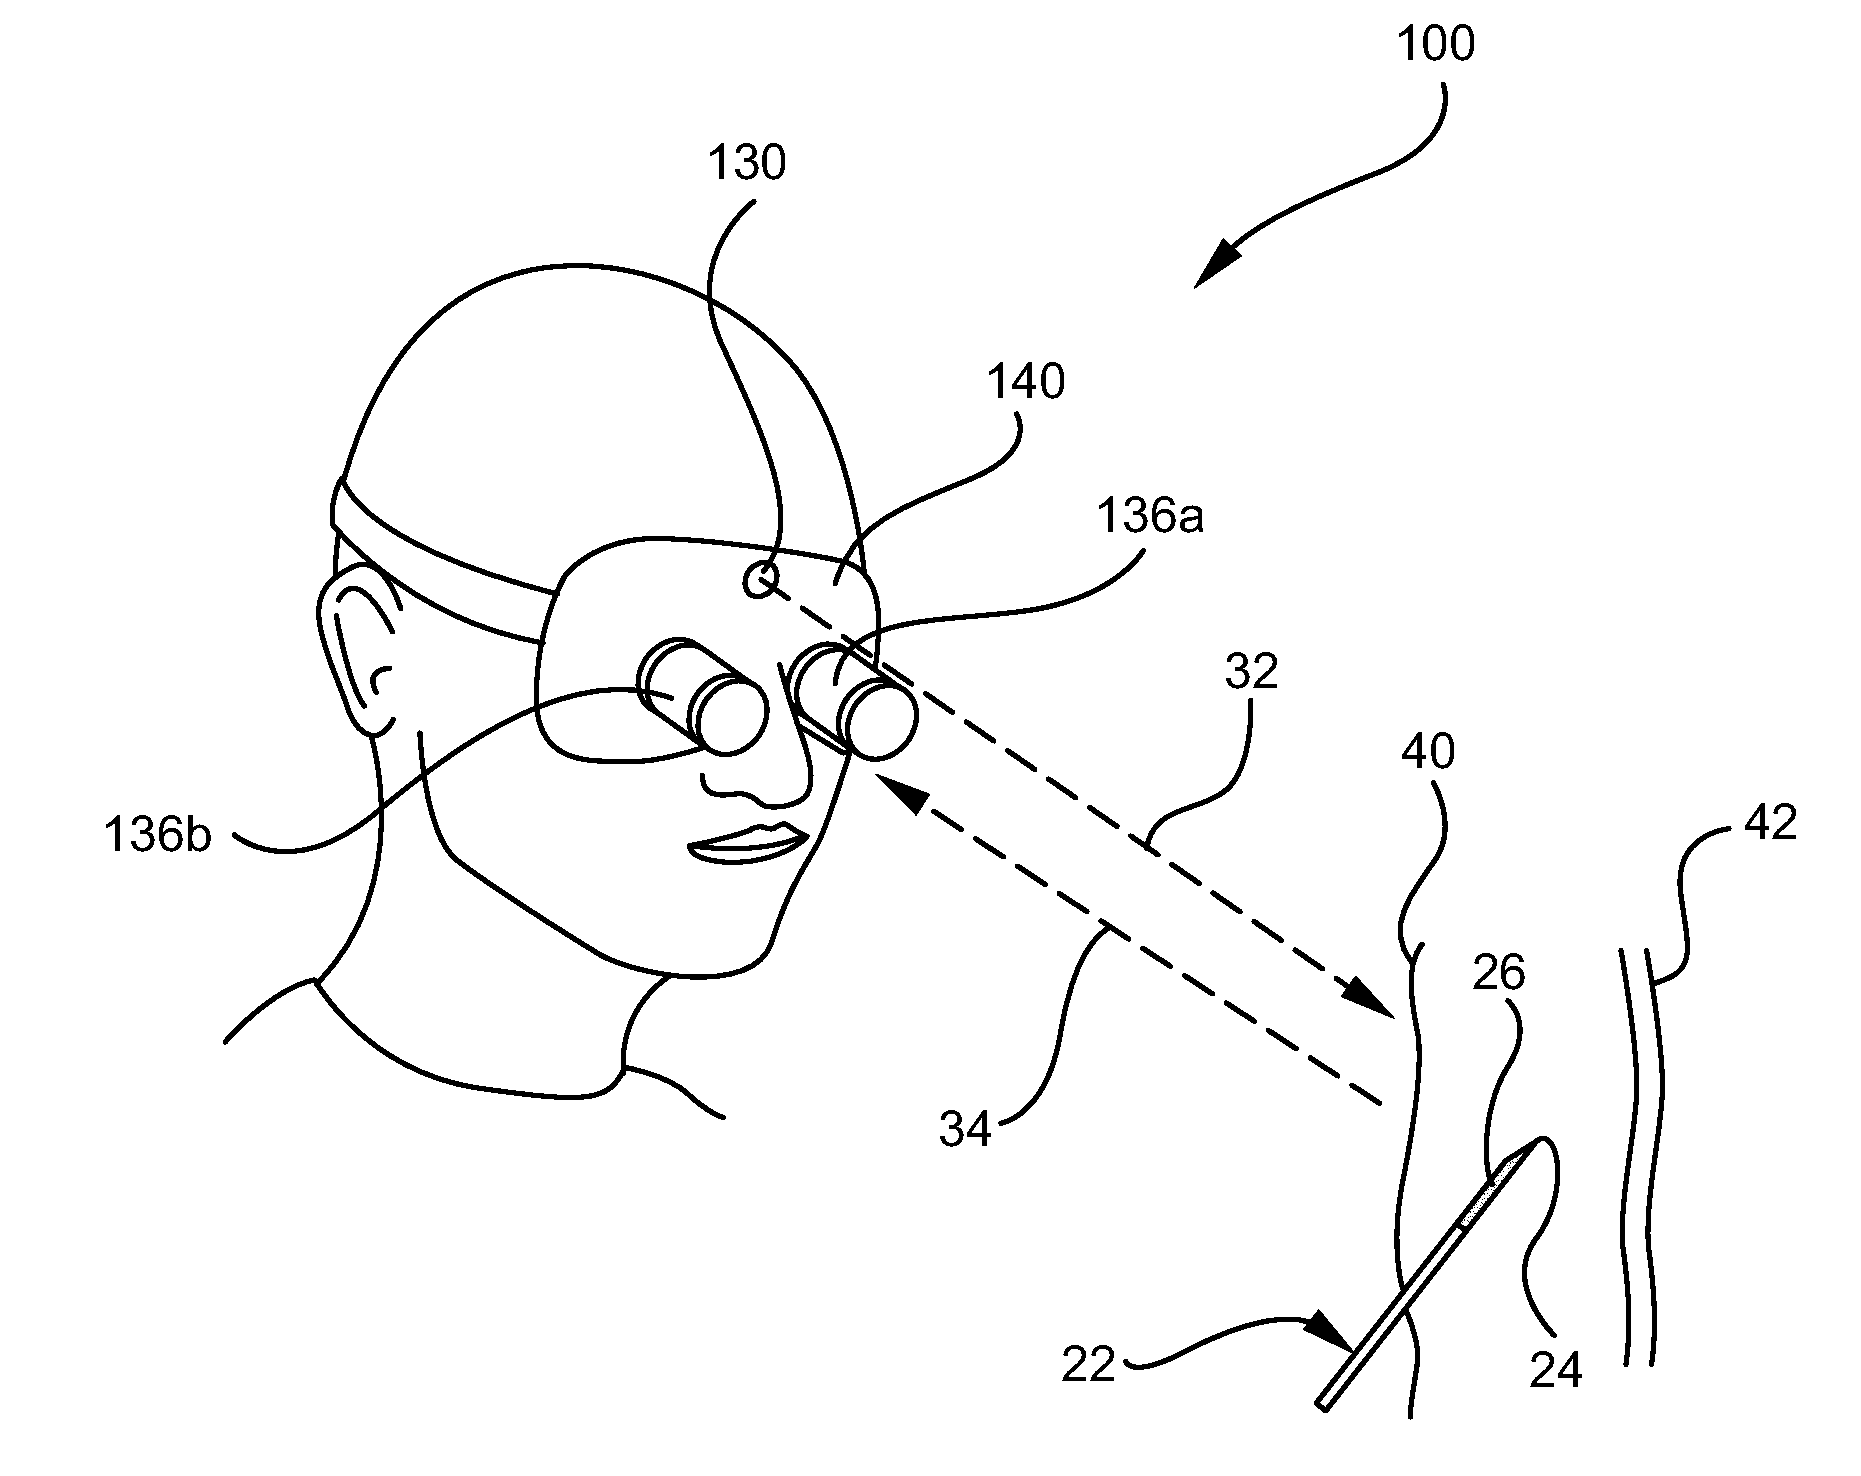 System and method for visualizing needle entry into a body